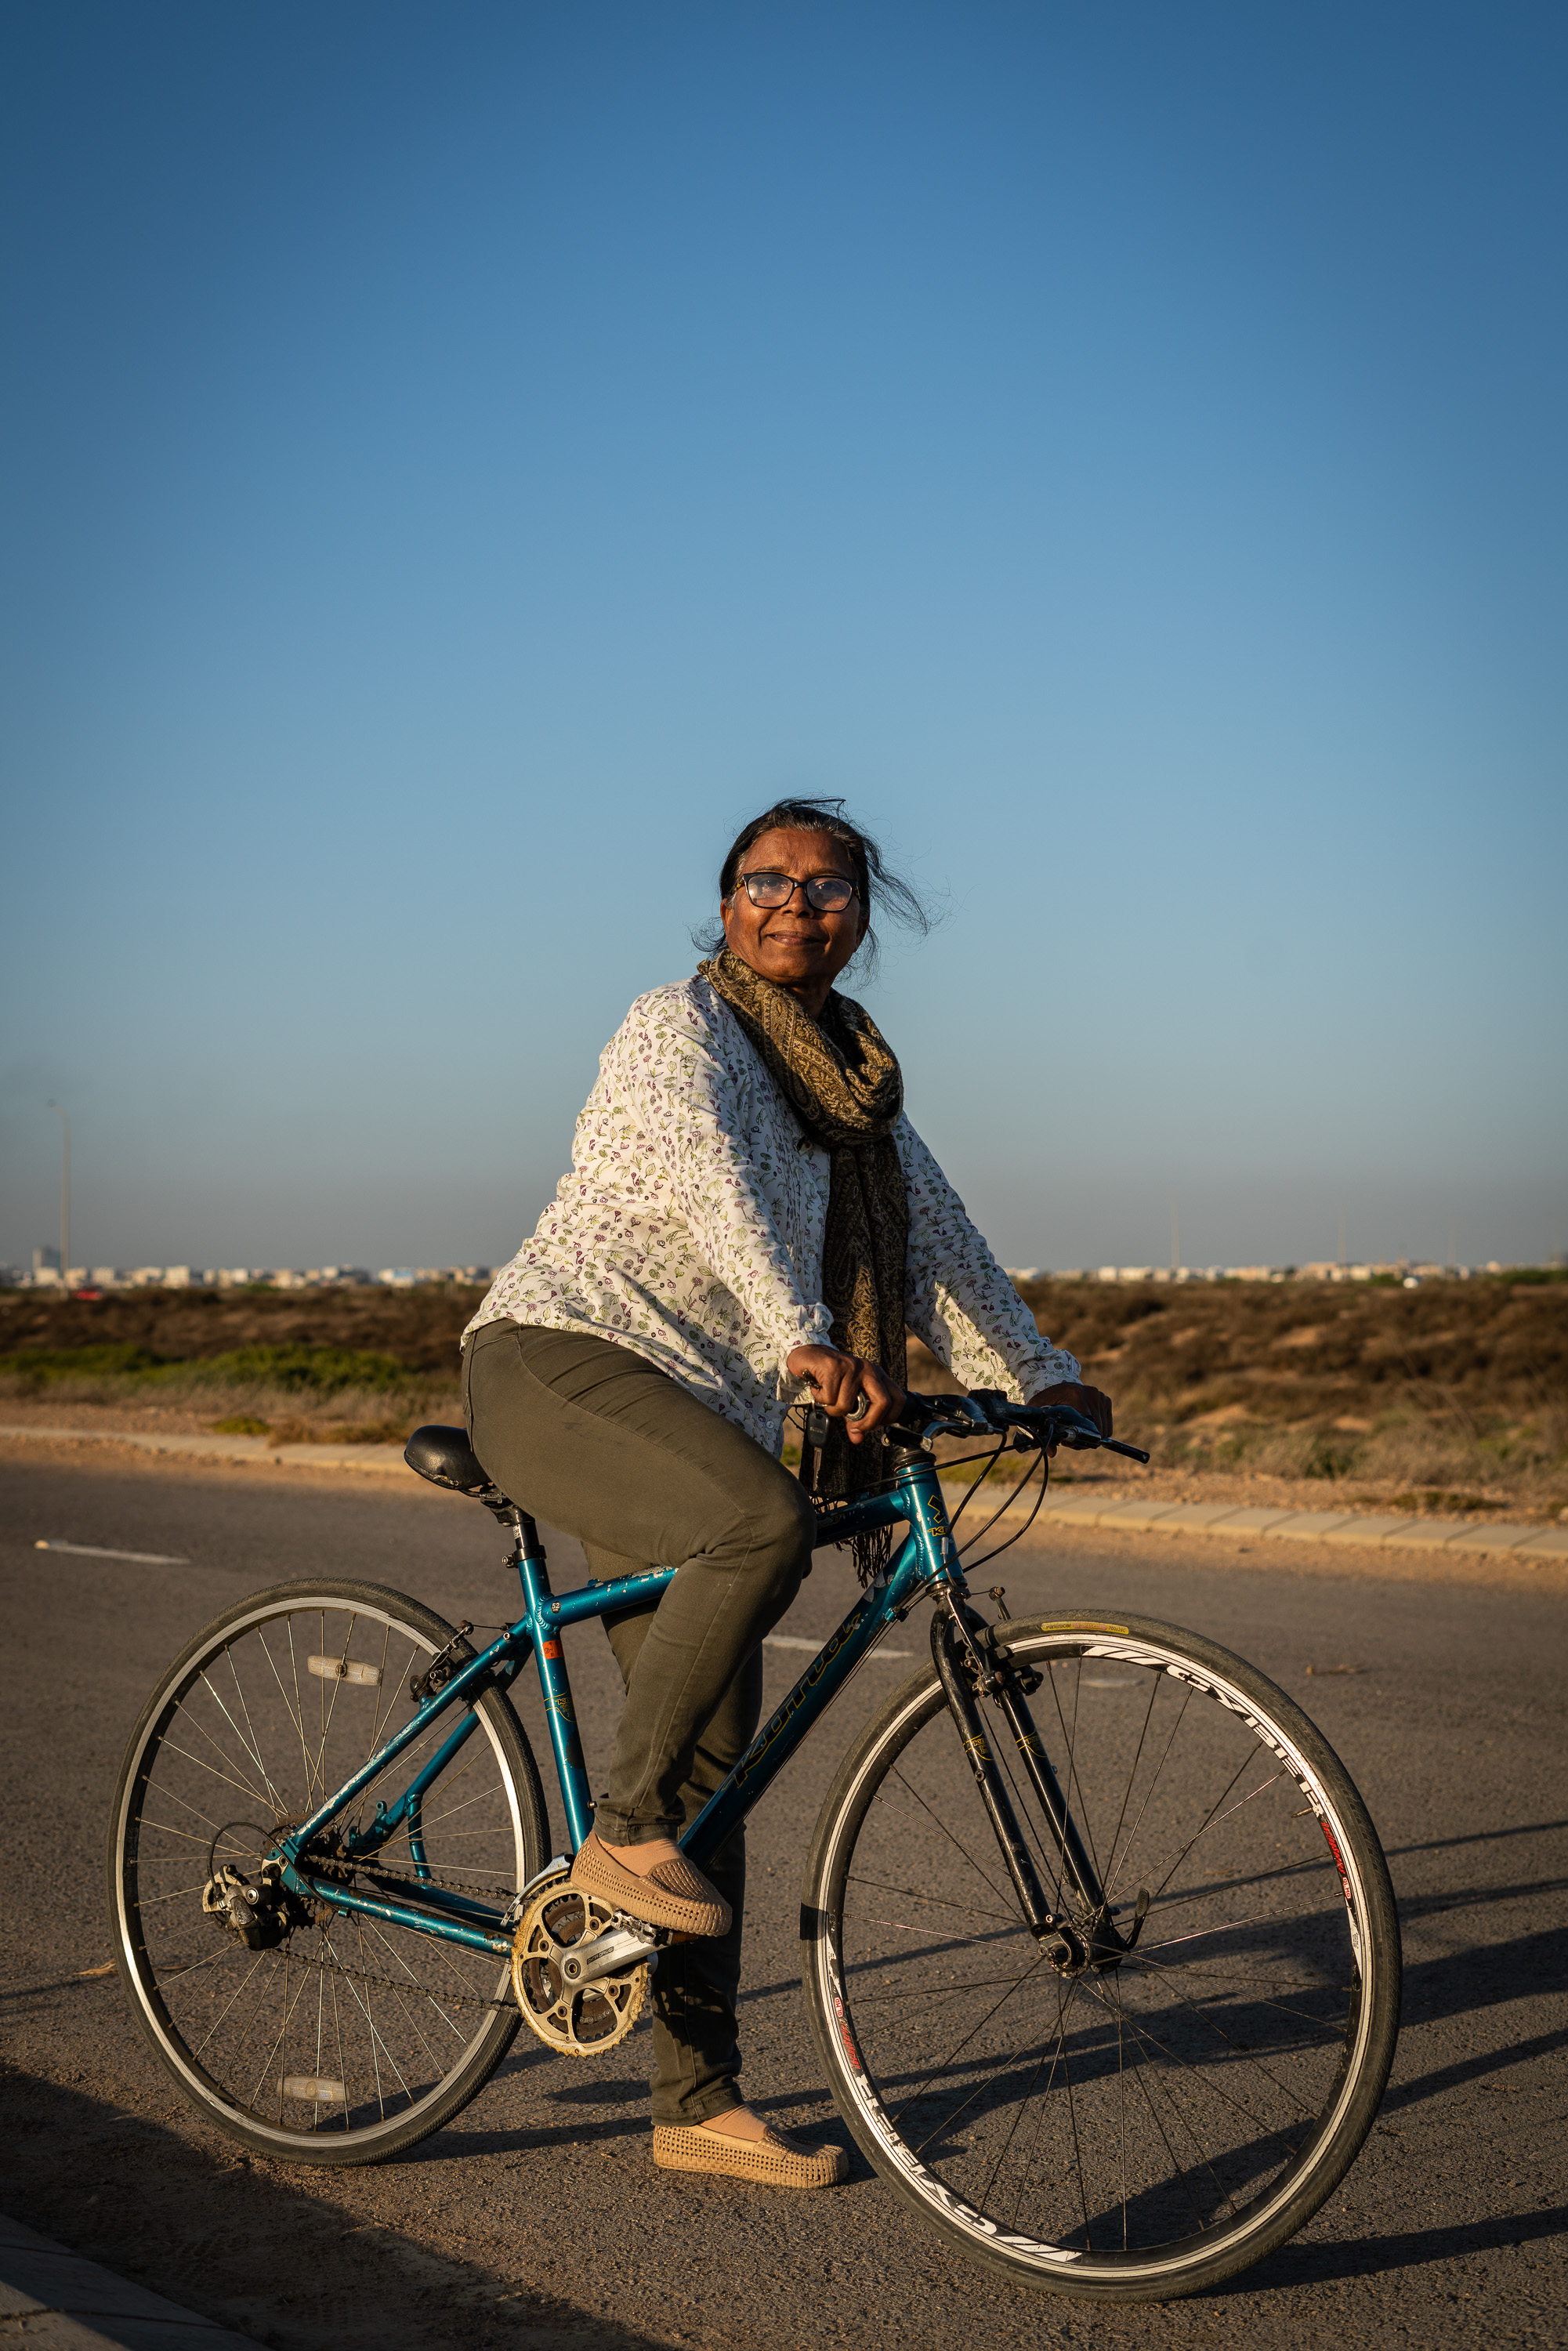 Zubaida Asghar Khwata is learning to ride a bike and motorbike at the age of 62 in Karachi, Pakistan, so she can surprise her children over in Canada (photo: Philipp Breu)